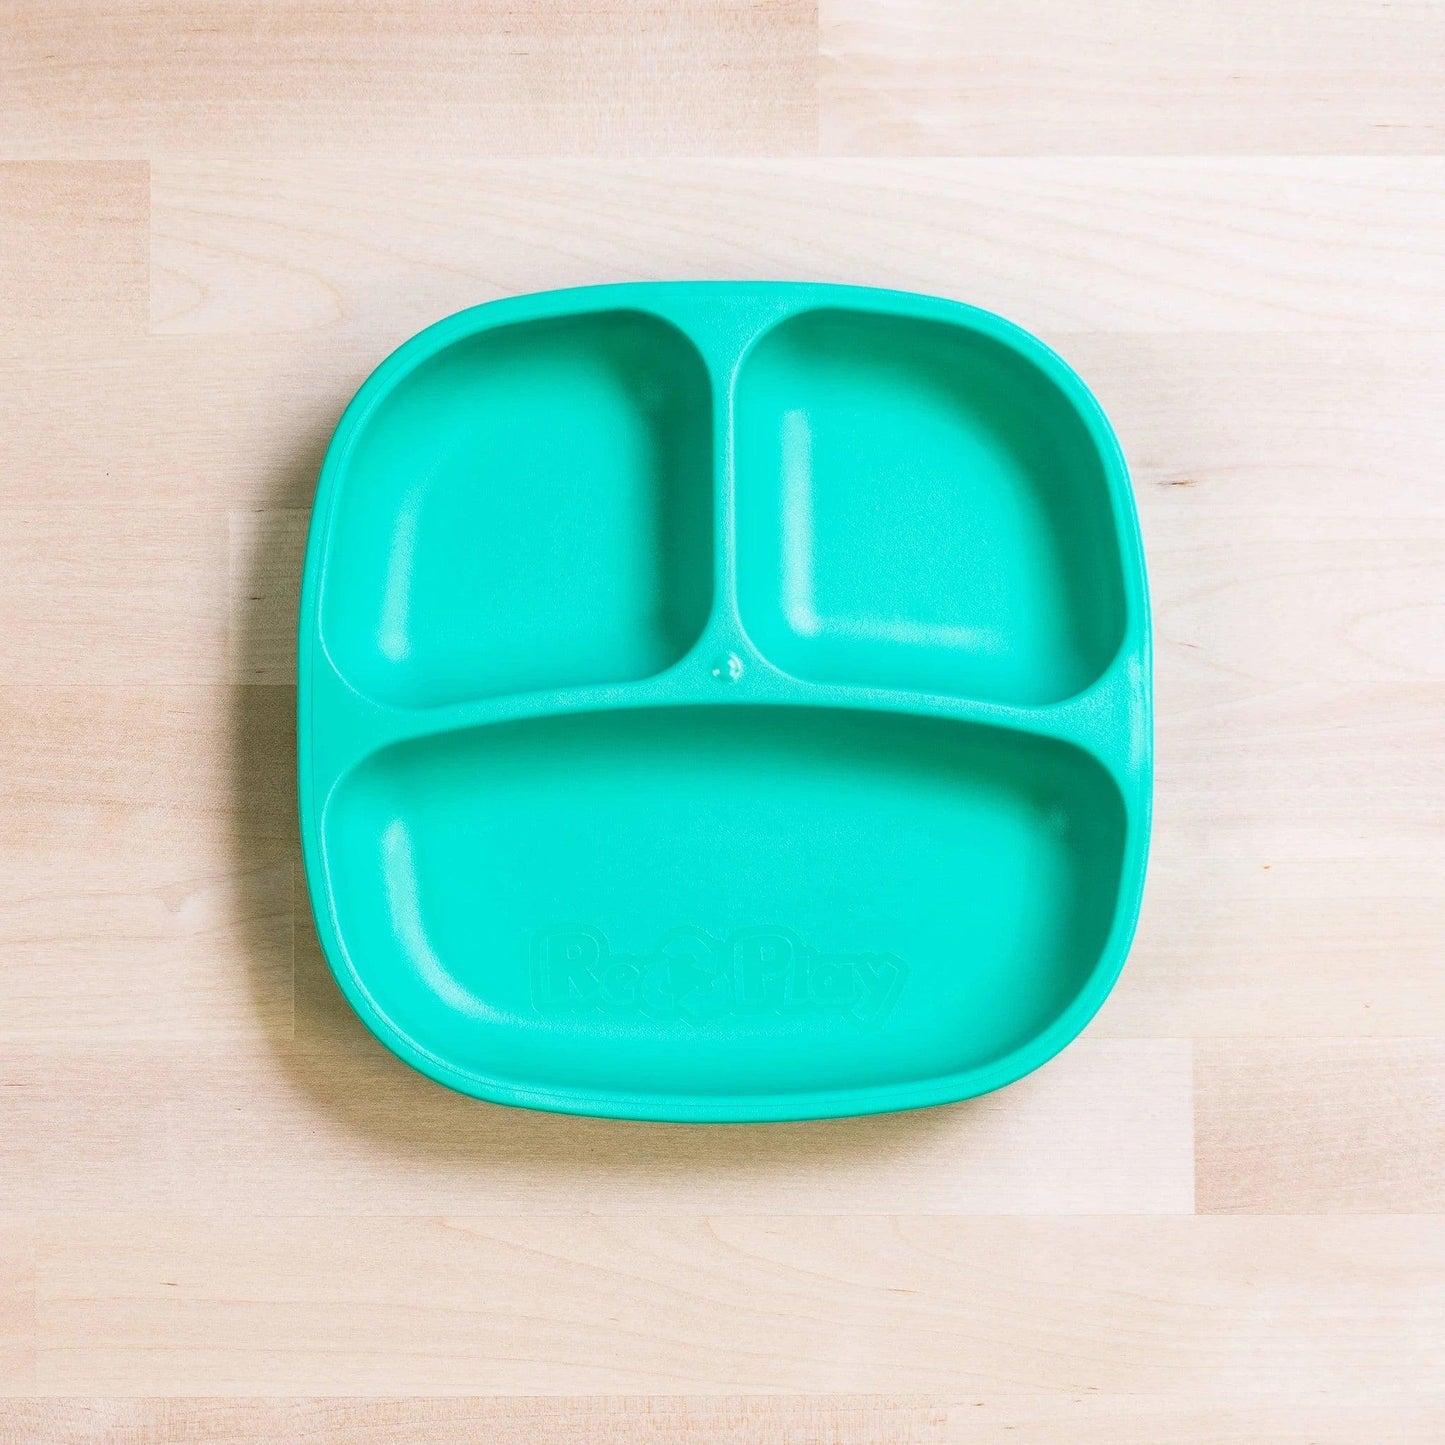 Re-Play Recycled Divided Plate - Aqua